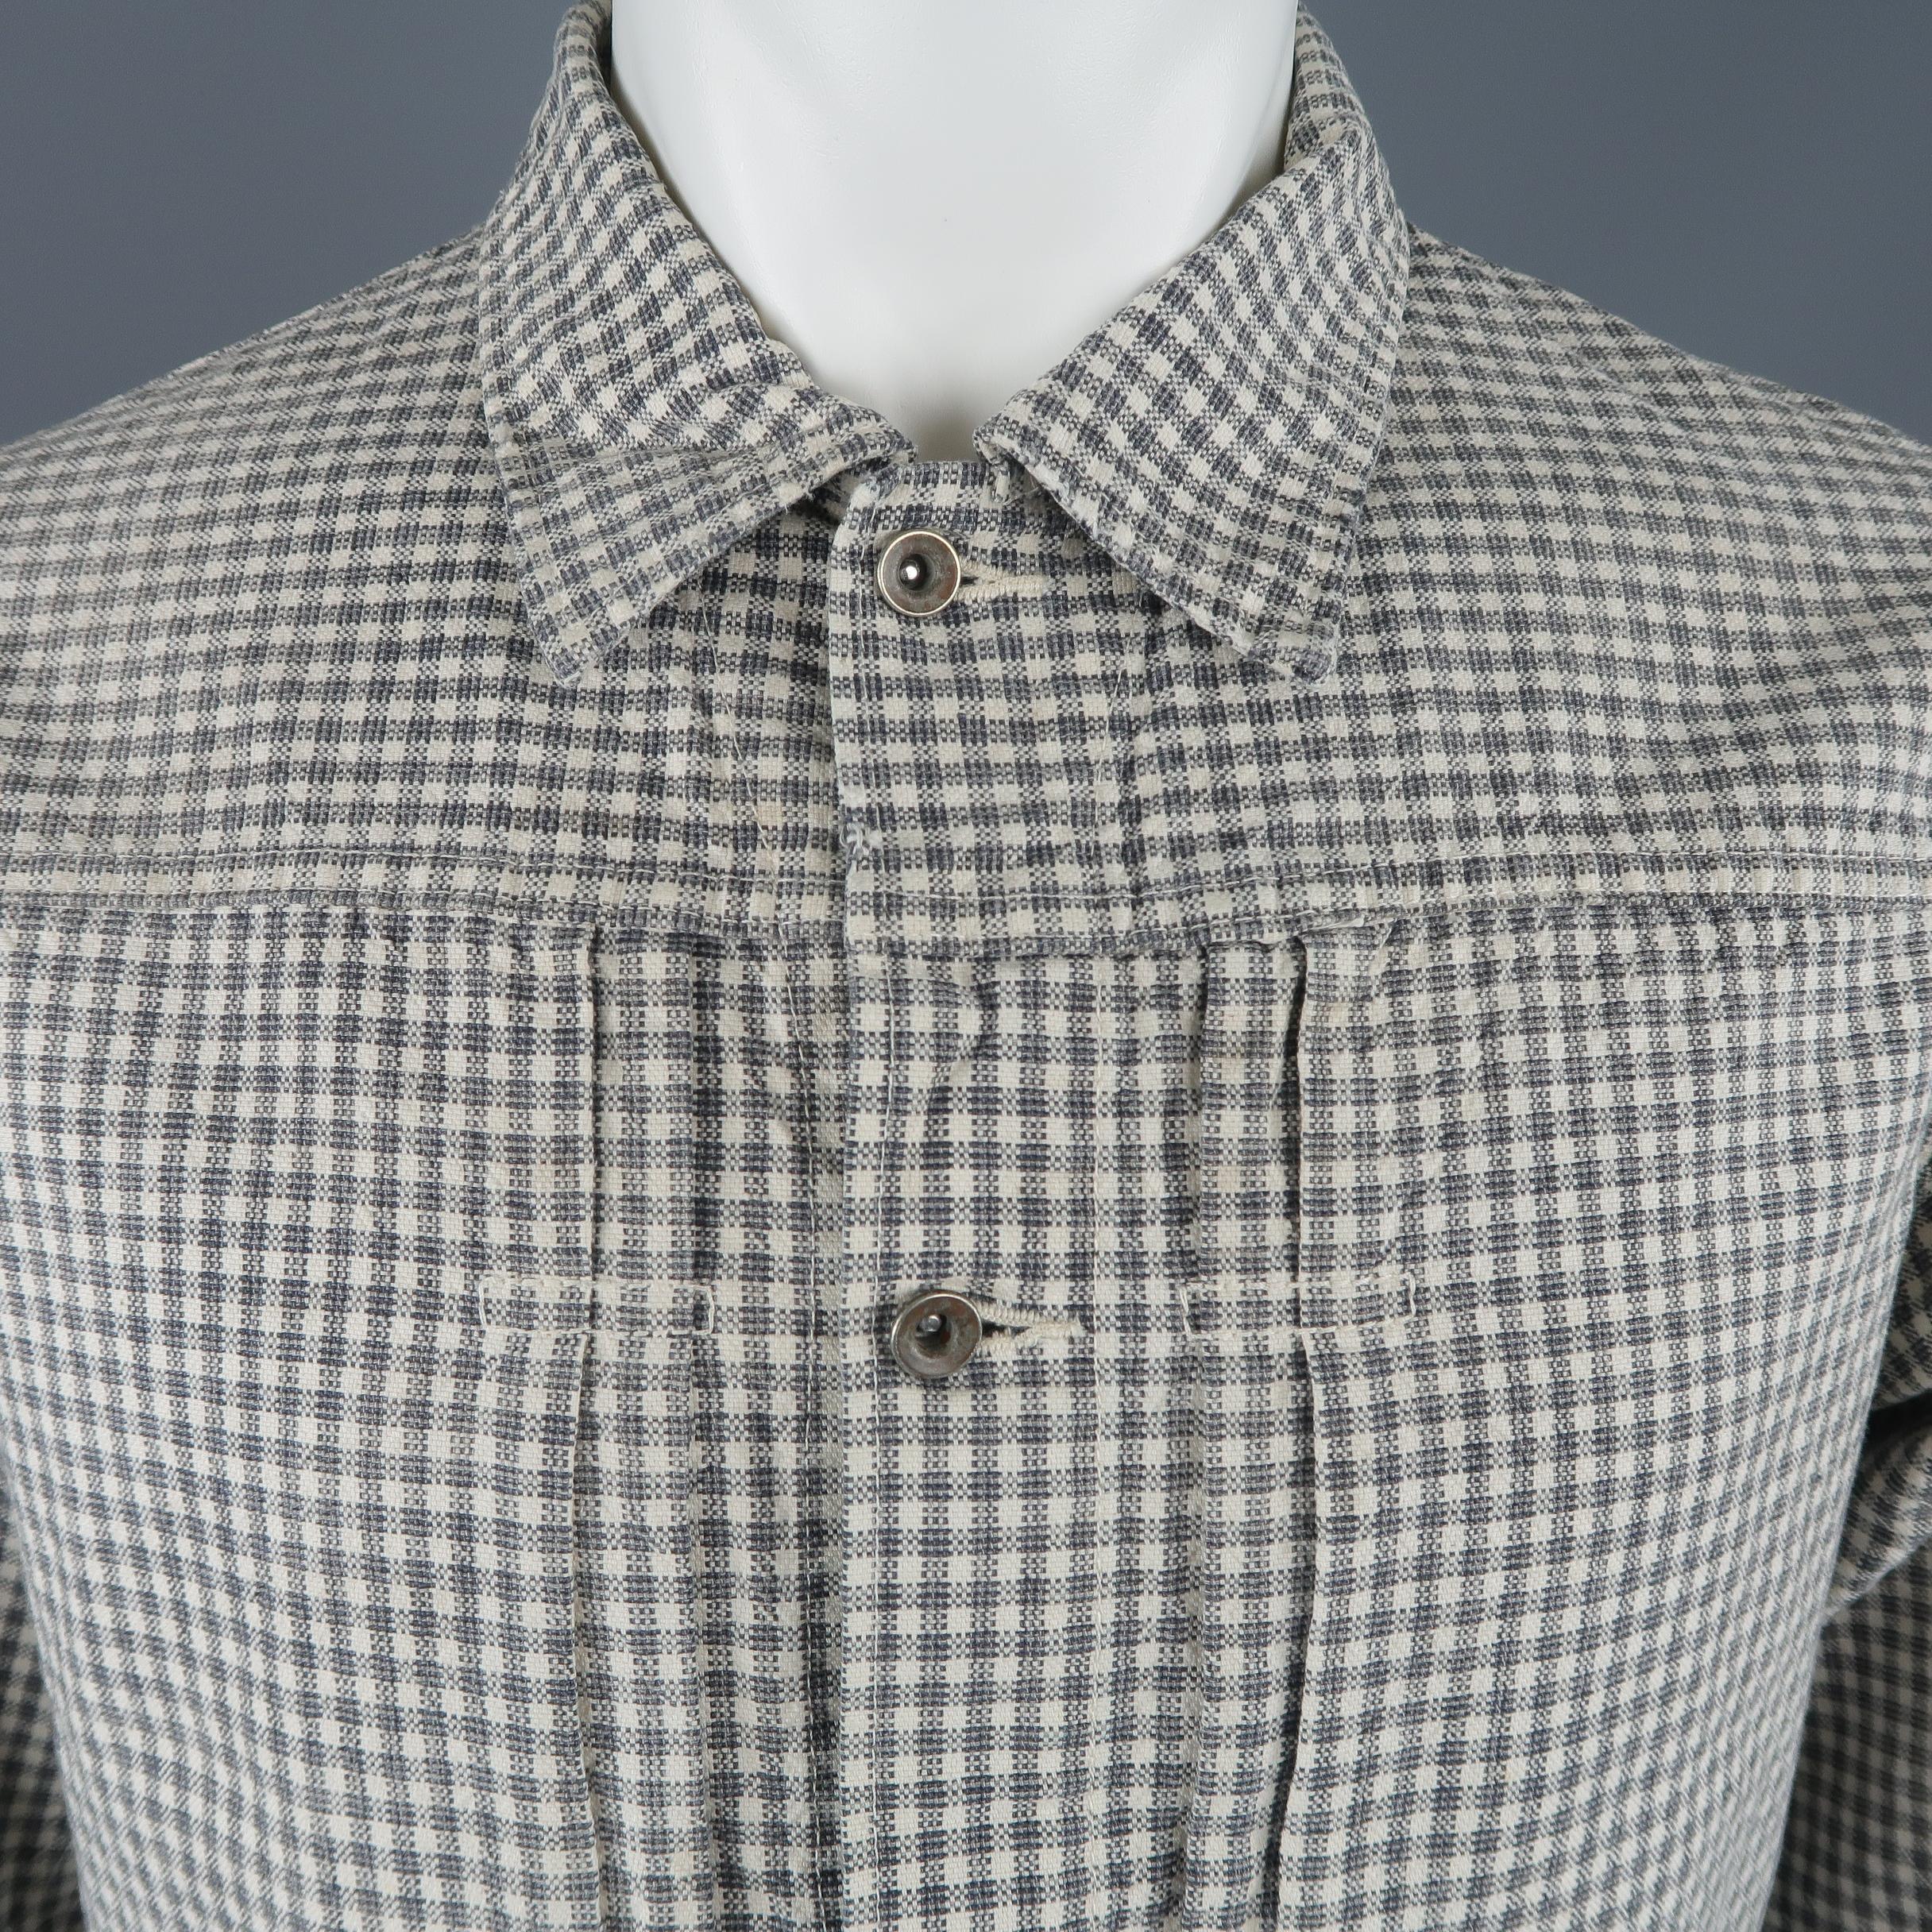 CHIMALA trucker style jacket comes in cream and gray checkered plaid pattern textured canvas with a pointed collar, pleated front detail, and distressing throughout. Discoloration on sleeve. As-is. Made in Japan.
 
Good Pre-Owned Condition.
Marked: